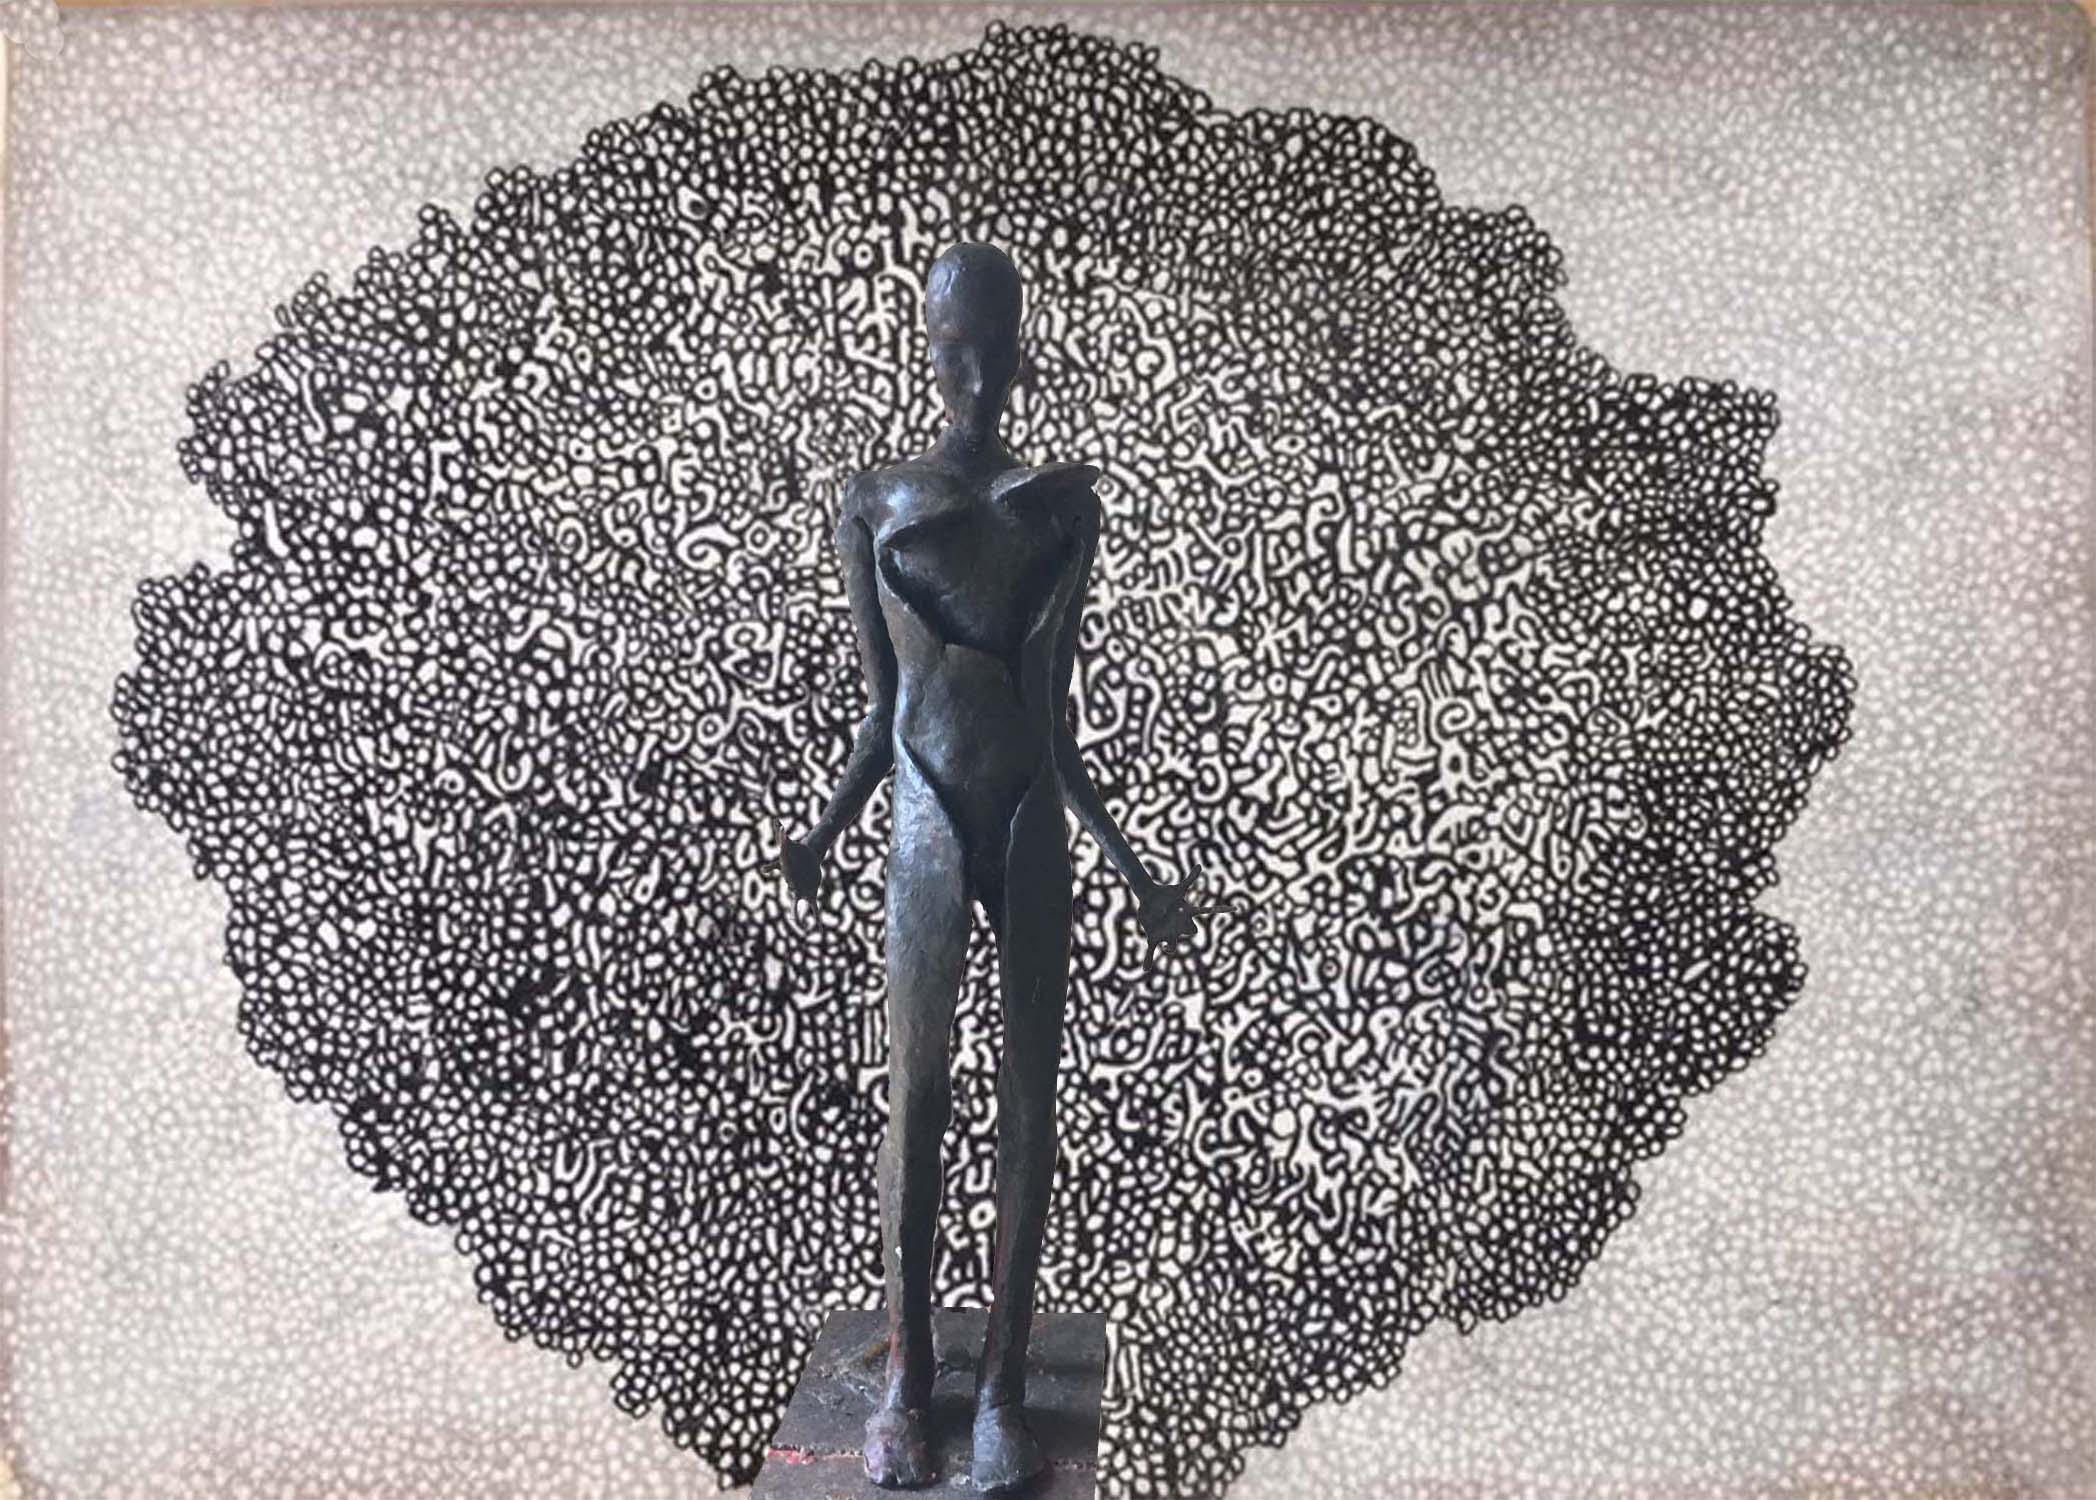 Finds Heart, 2019, pen/ink drawing and wax sculpture from Apology To Loneliness by Tom Cleveland